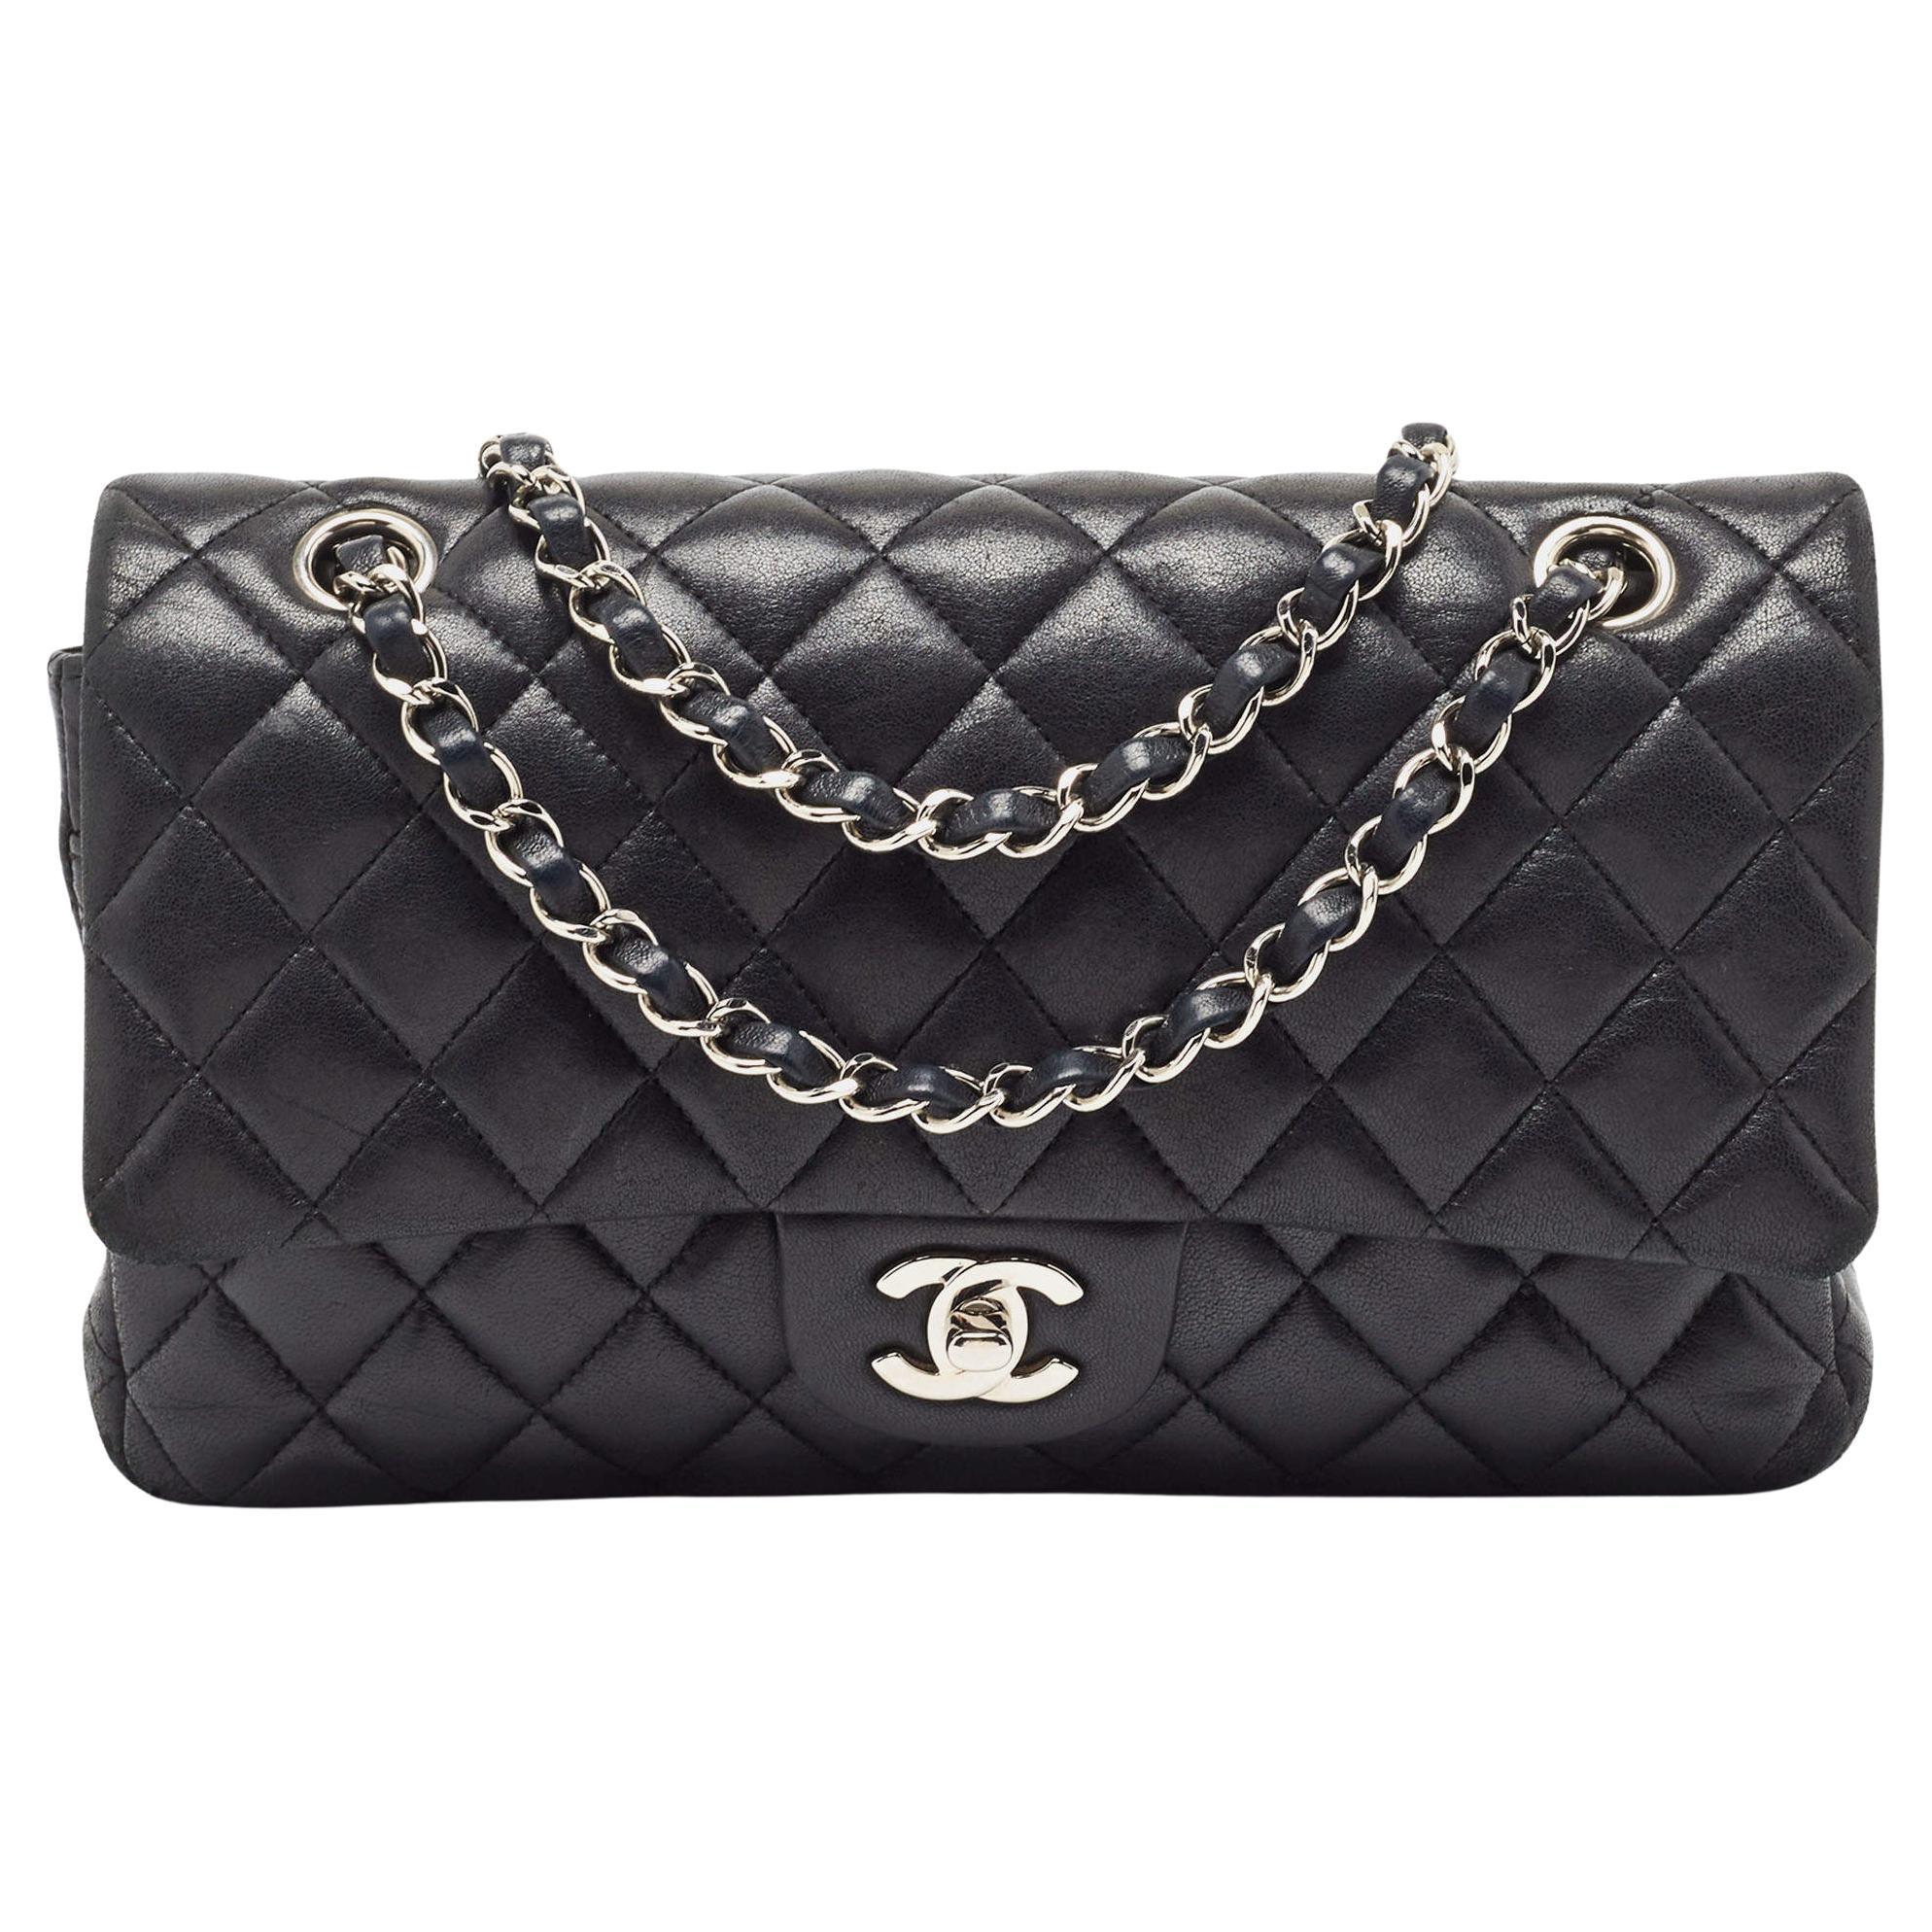 Chanel Black Quilted Leather Small CC Turnlock Full Double Flap Bag